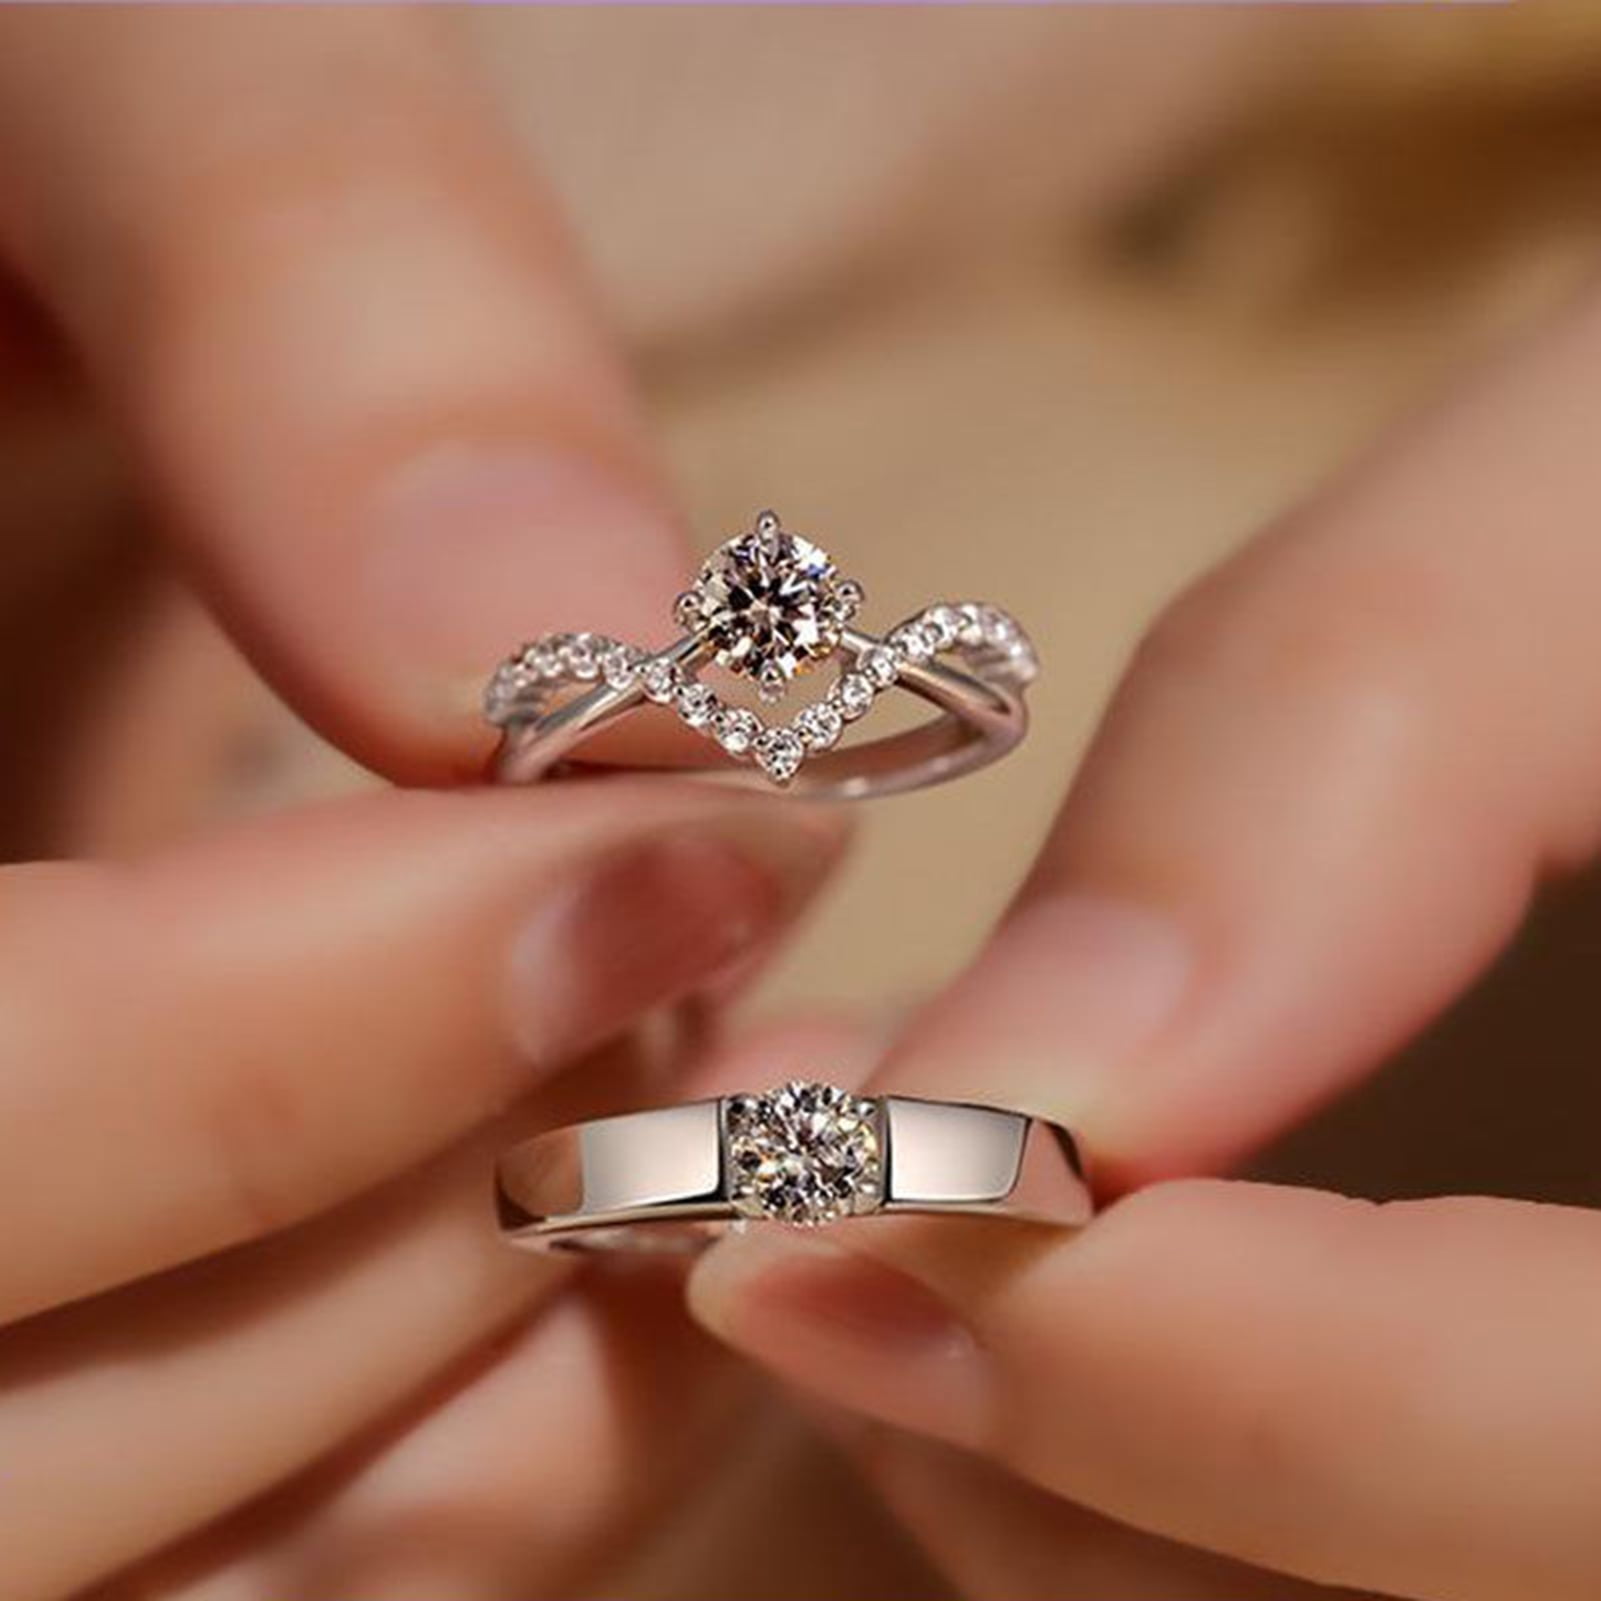 Couple Rings | Matching Rings for Couples - Friendly Diamonds